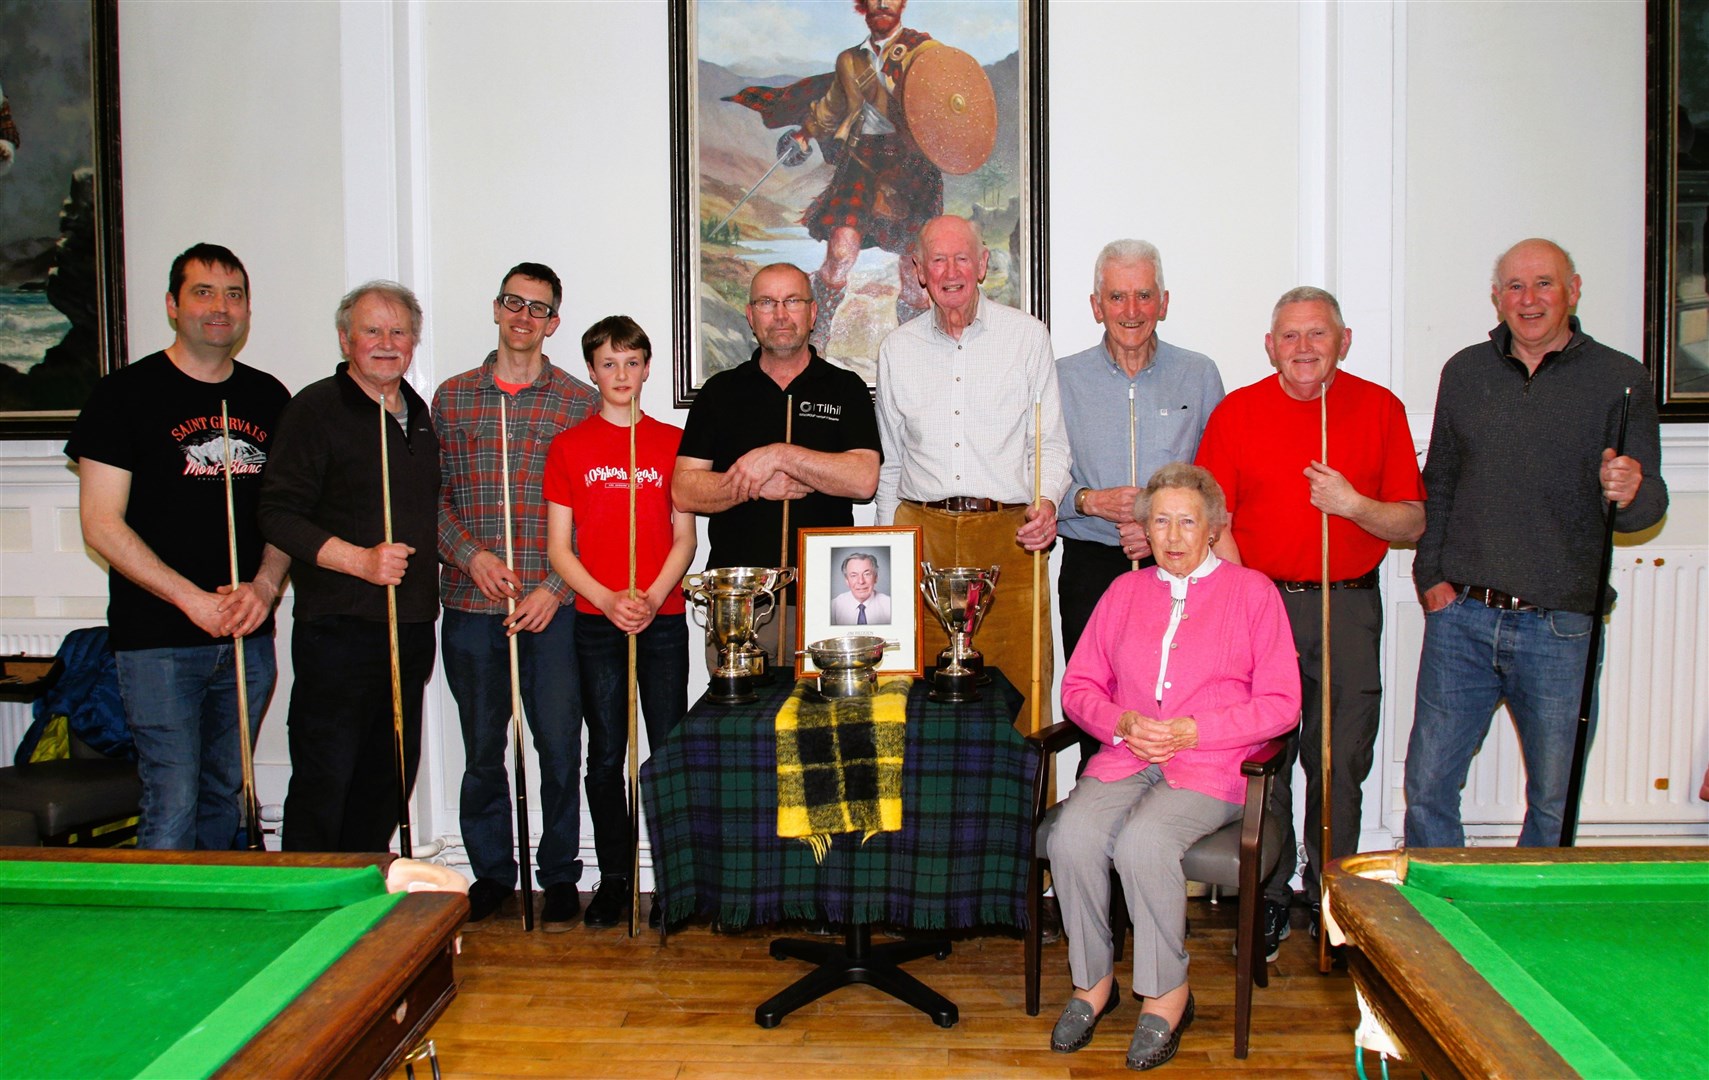 Members of the Grantown and District Billiards and Snooker Club at their prize-giving evening at the Nethy Bridge Hotel.